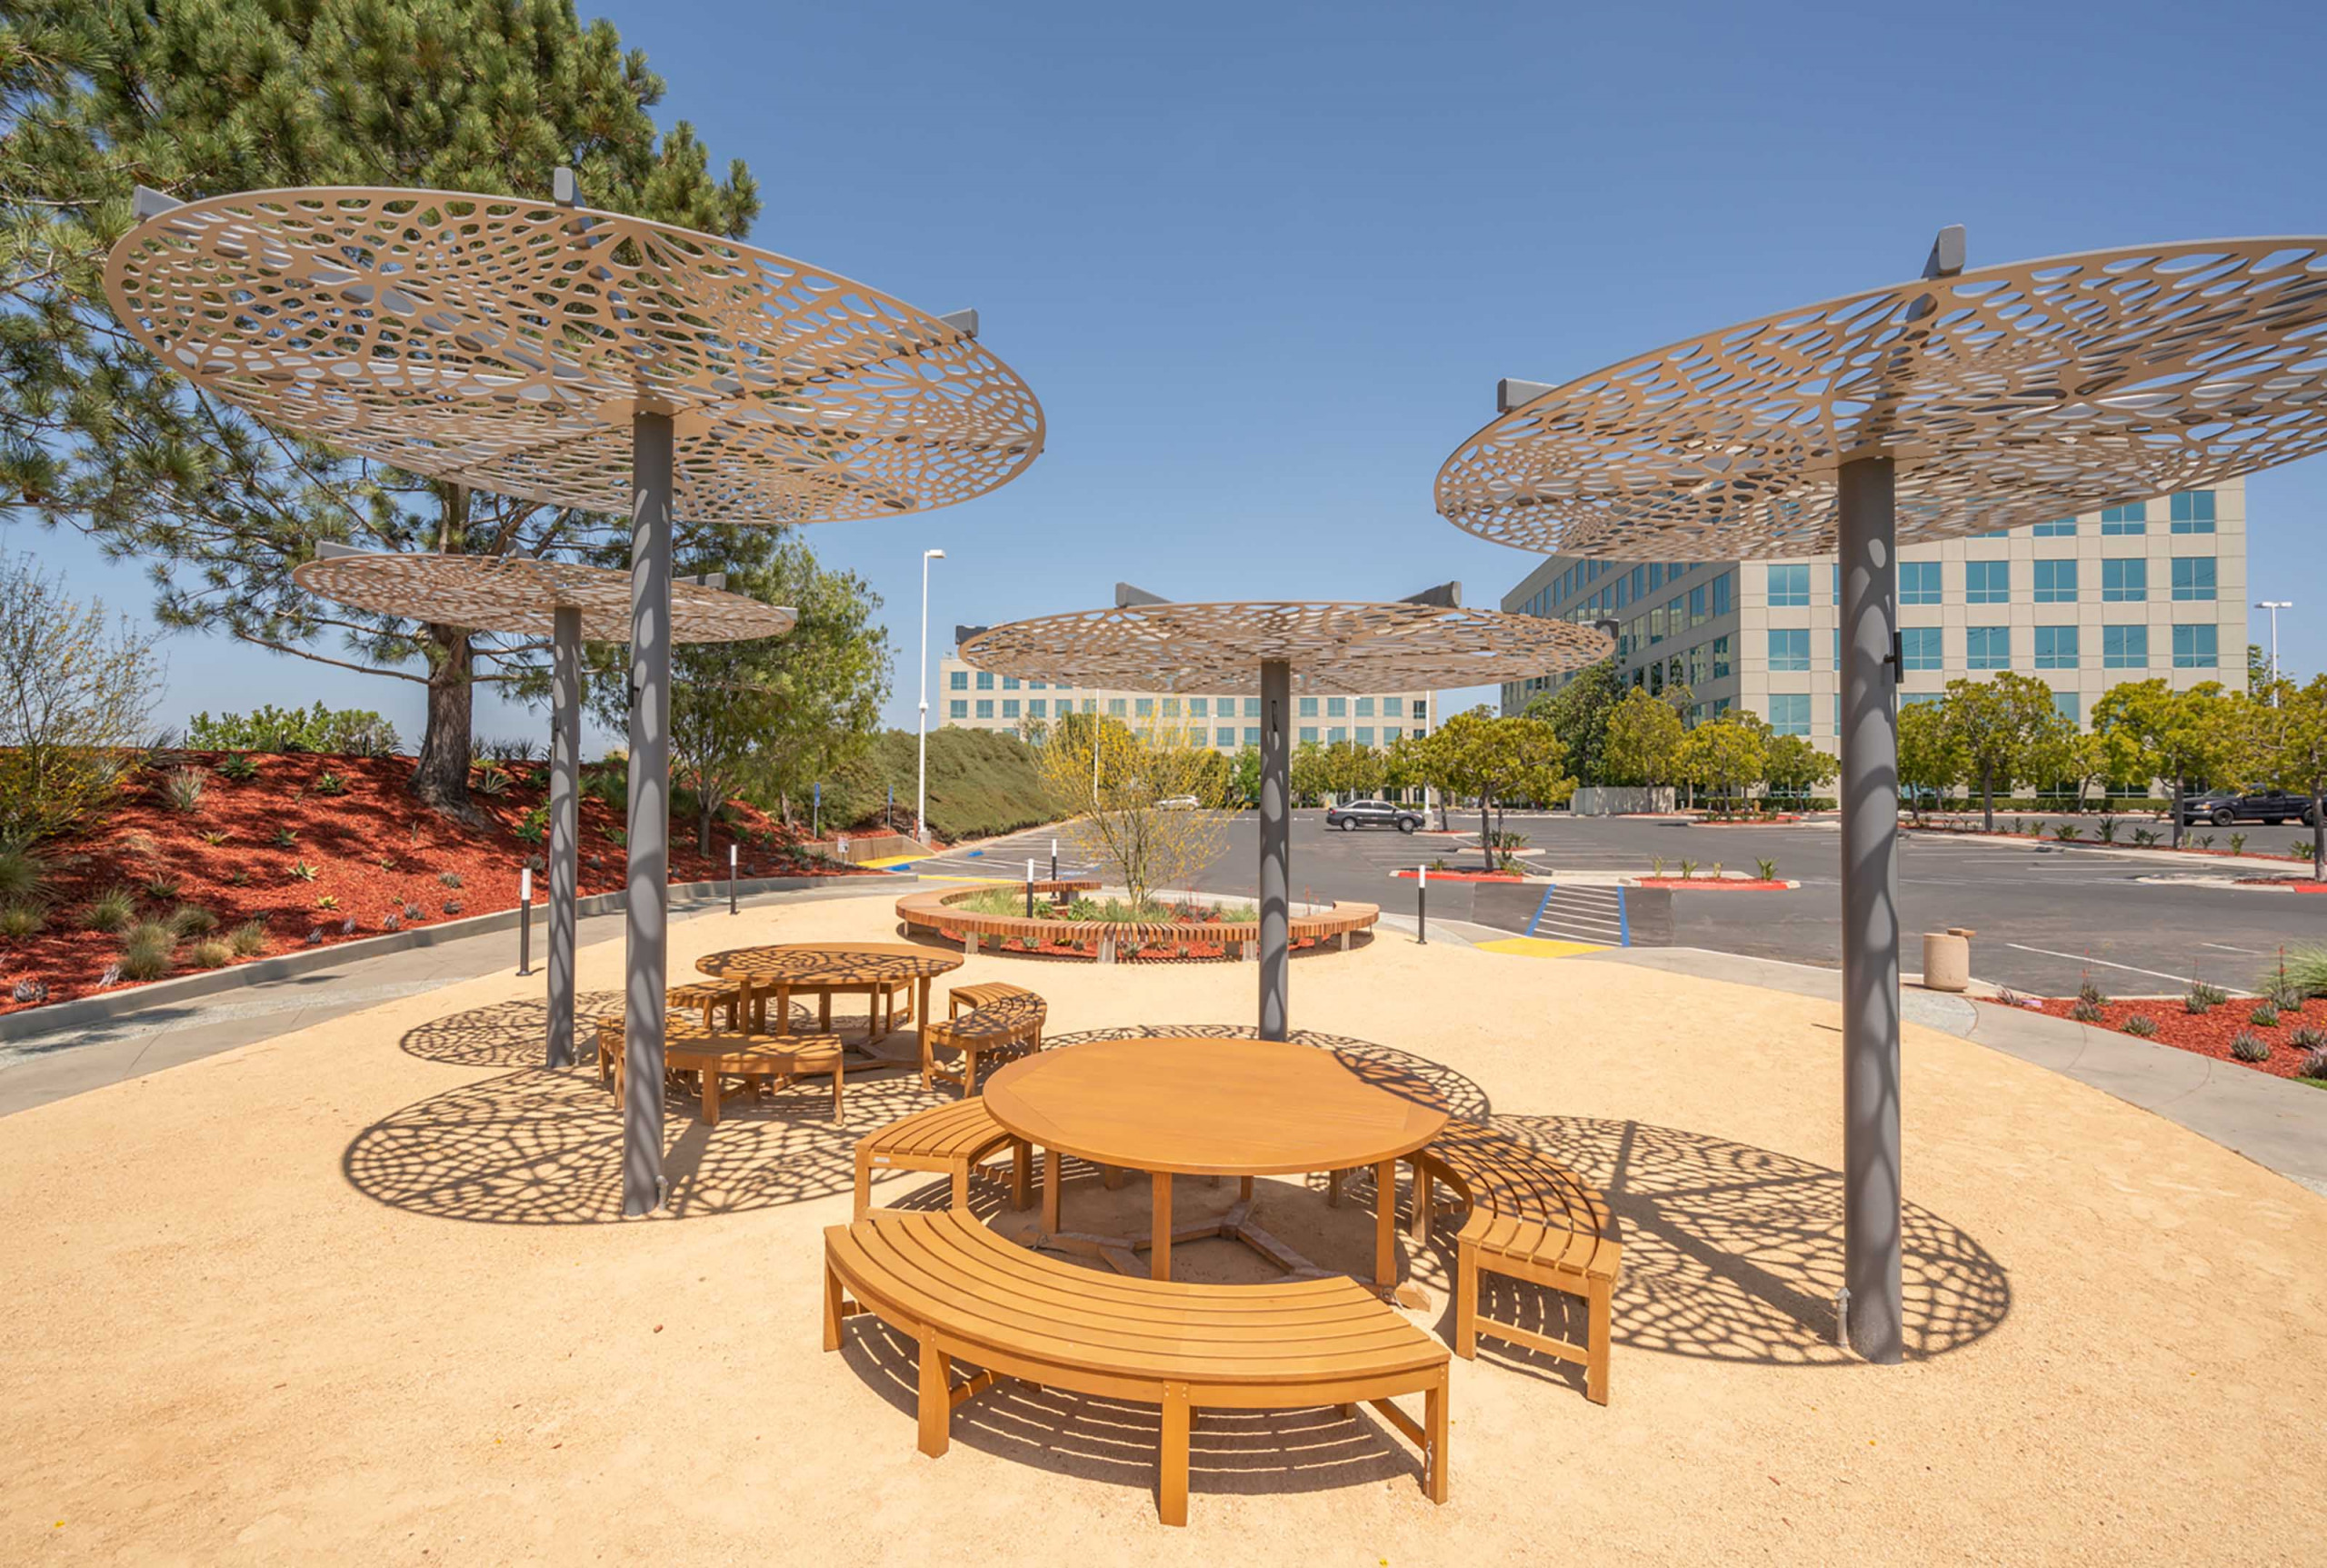 This outdoor area with tables and chairs features several Arktura canopies that resemble umbrellas above the tables. 